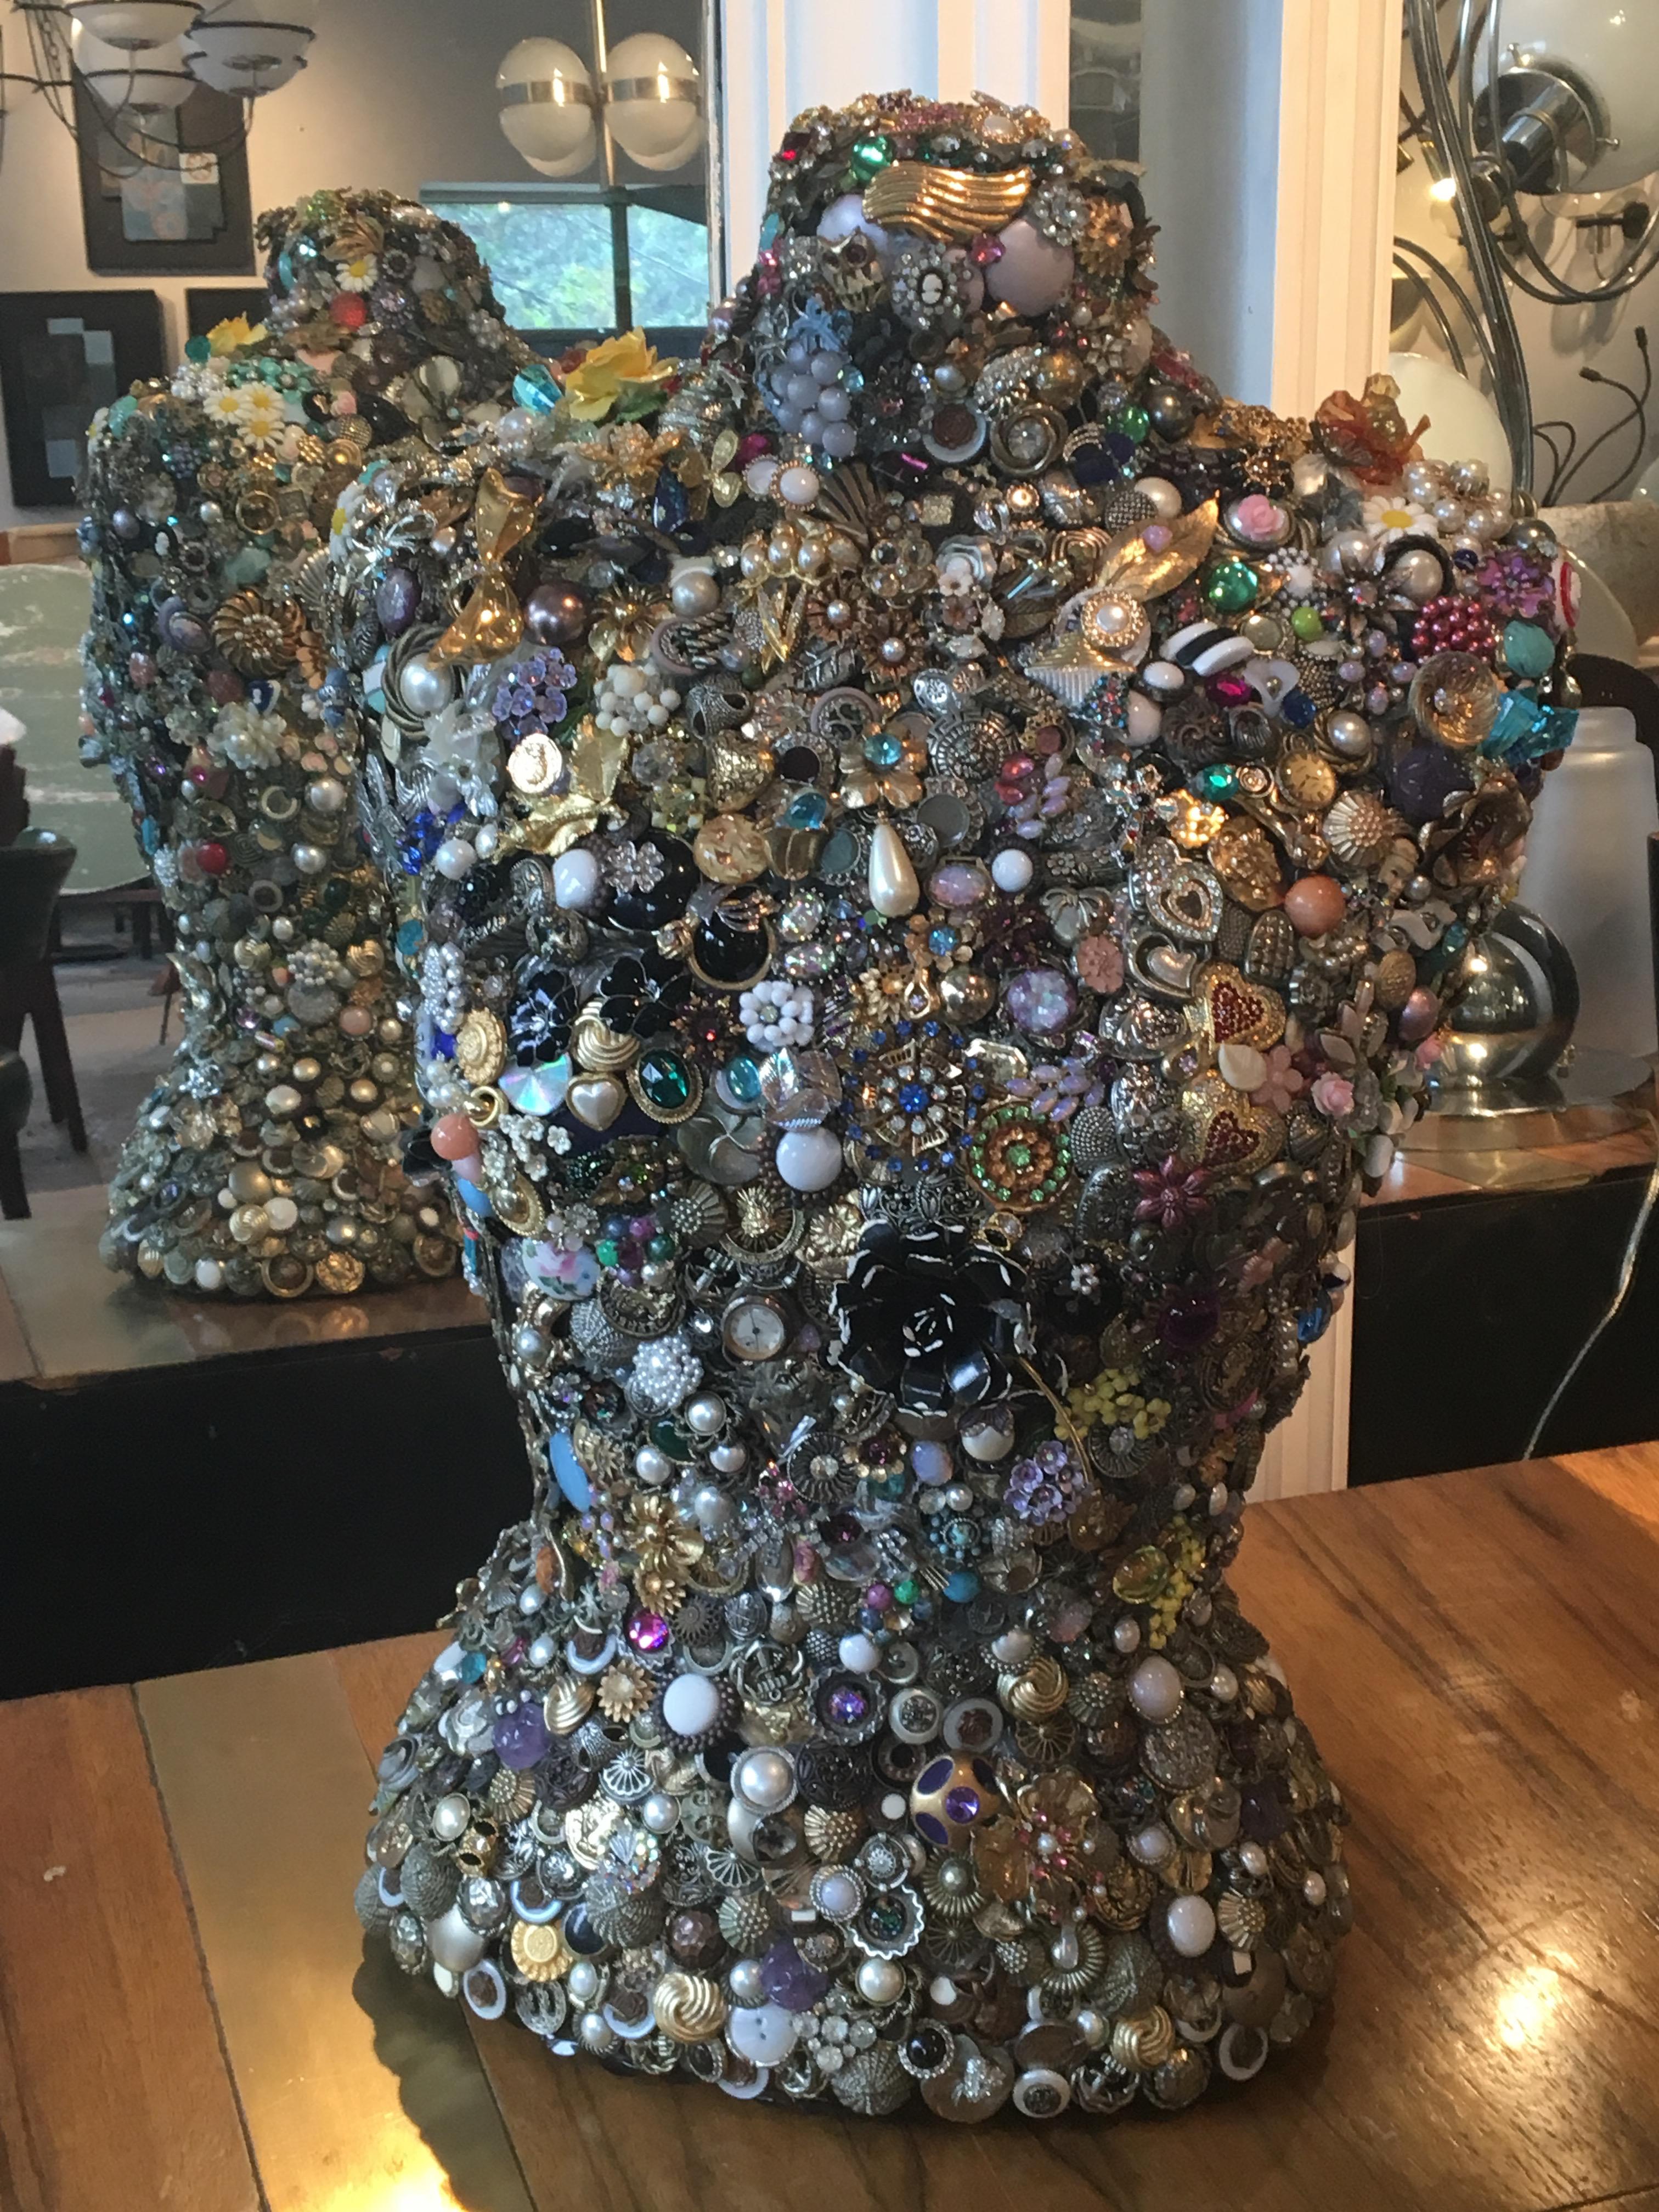 Vintage dress form entirely covered in vintage jewelry, timepieces, and buttons.